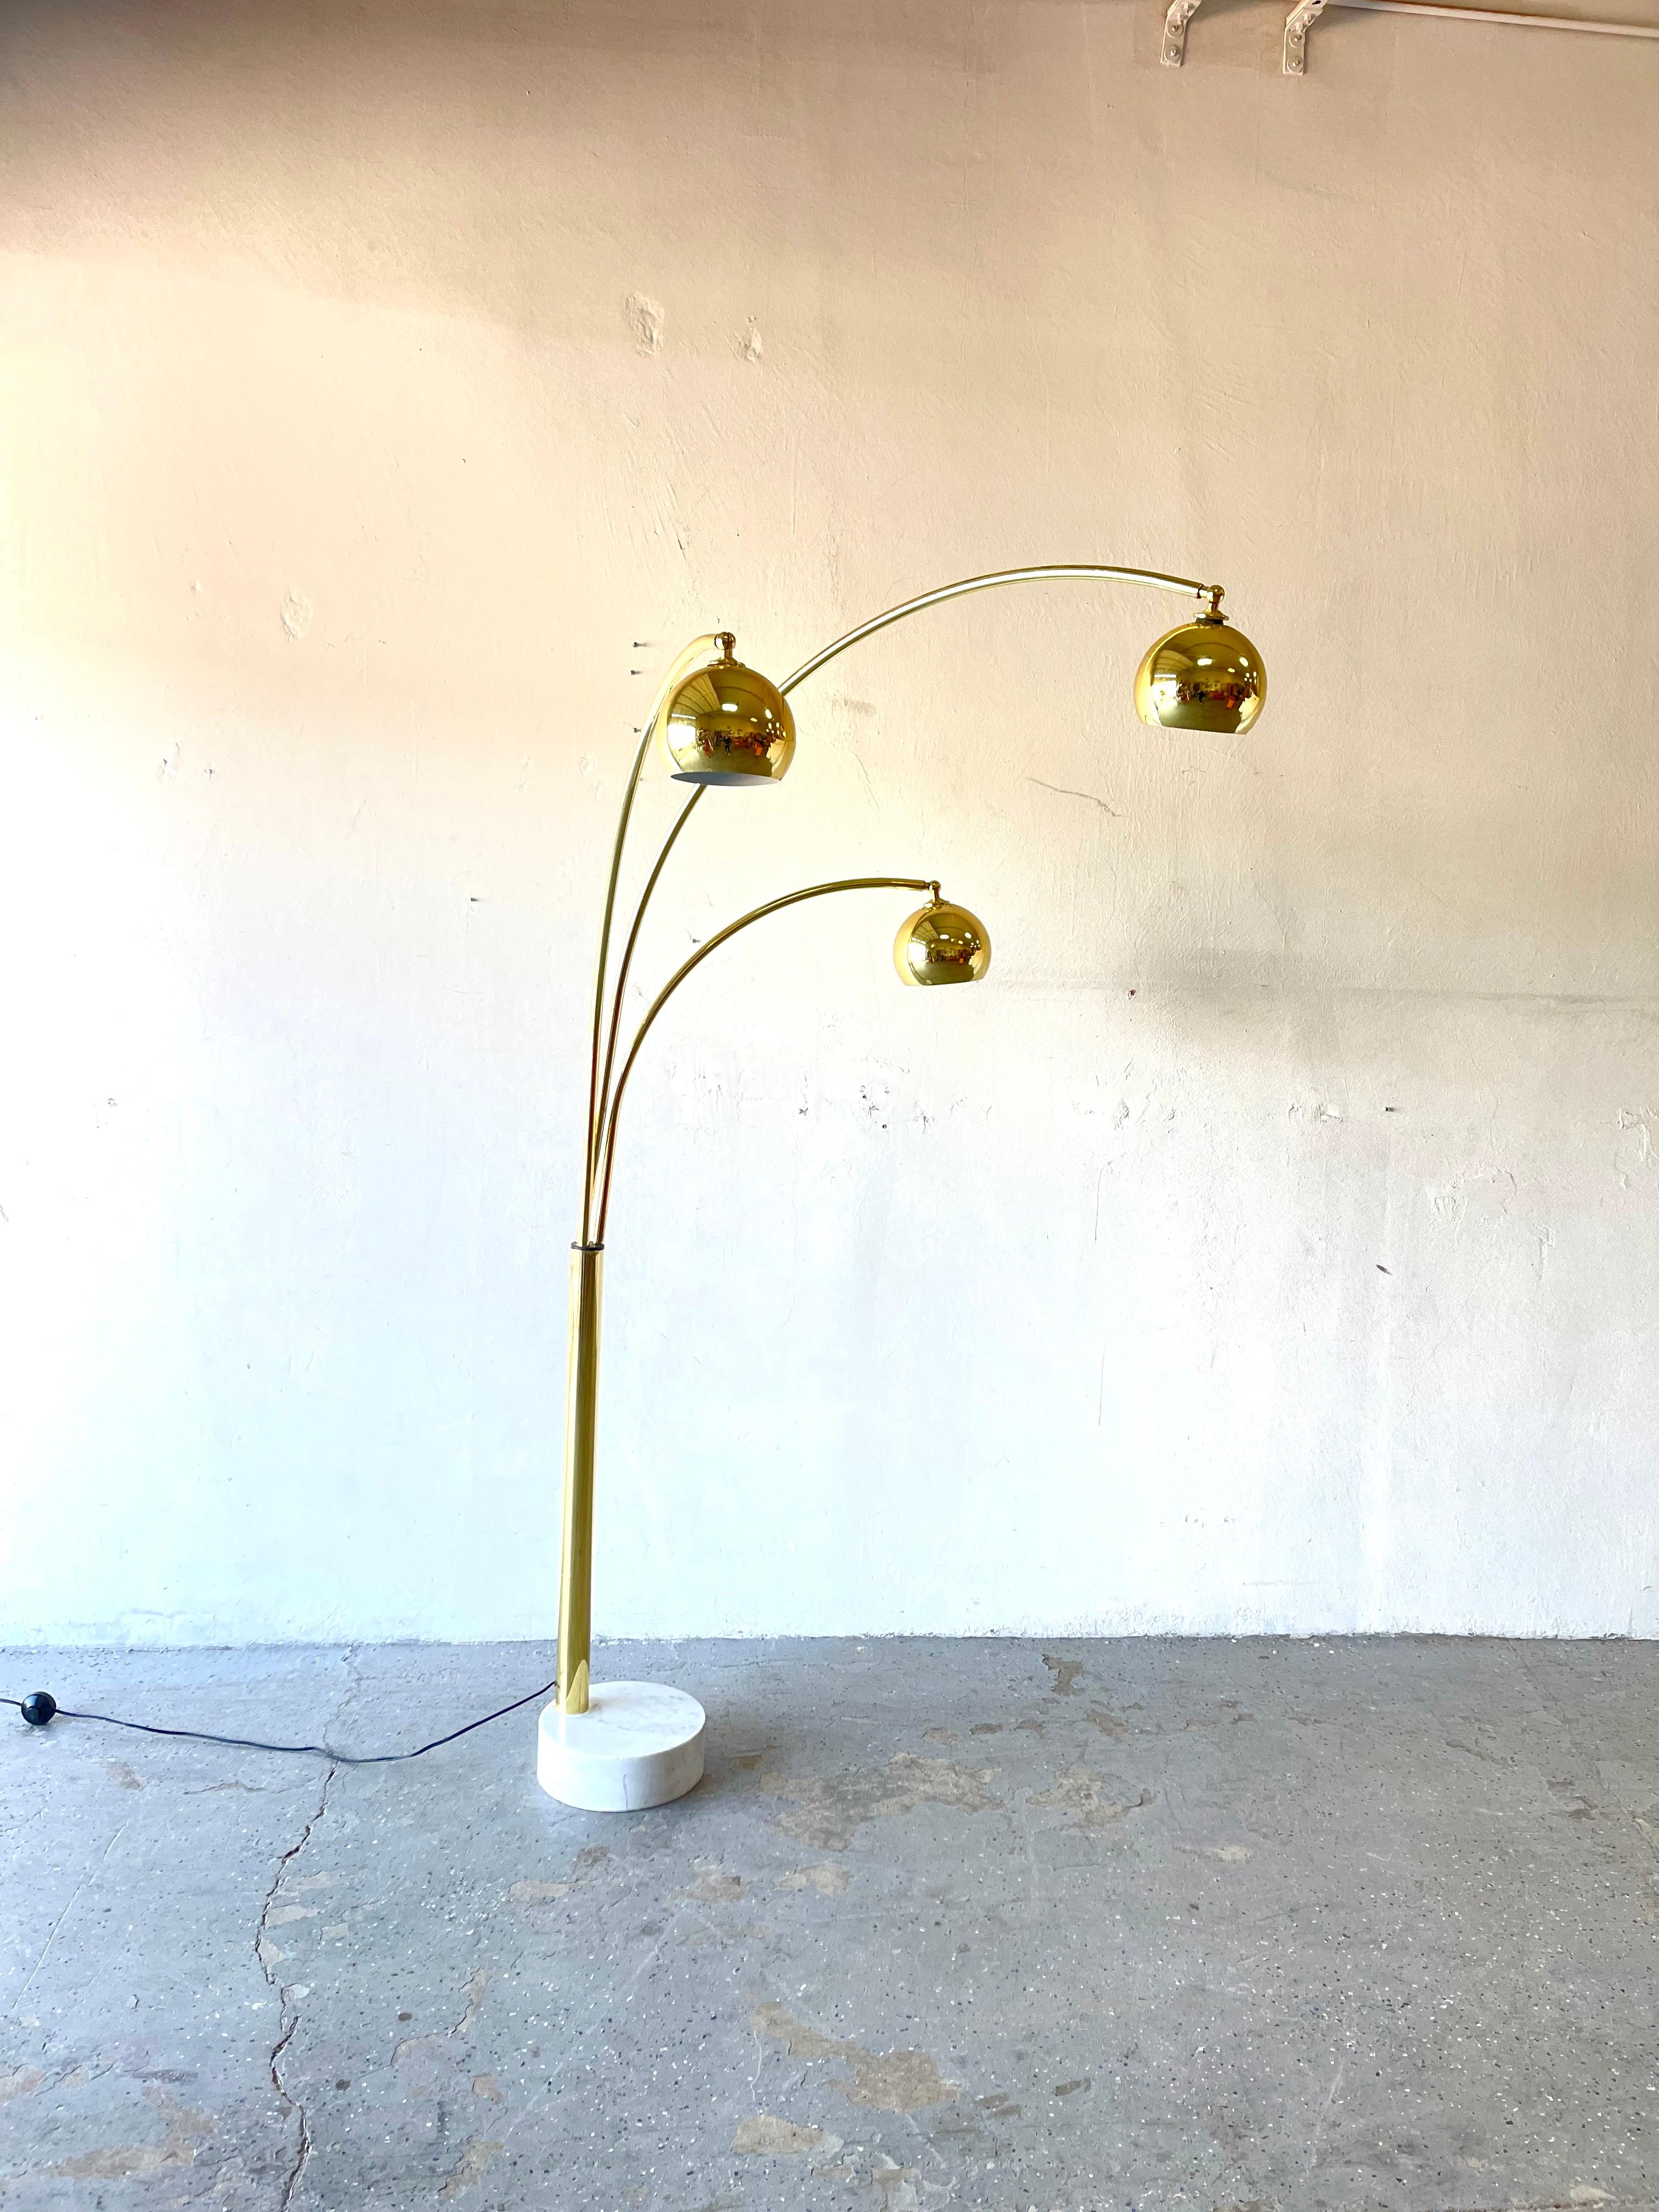 Italian cool Arc floor lamp, designed by Goffredo Reggiani around 1960-70s. Marble base and adjustable brass brackets with three balls.

Made in Italy 


Measures : Height: 81 in 

Width: 72 in

Depth: 43 in 

Marble base 11.5